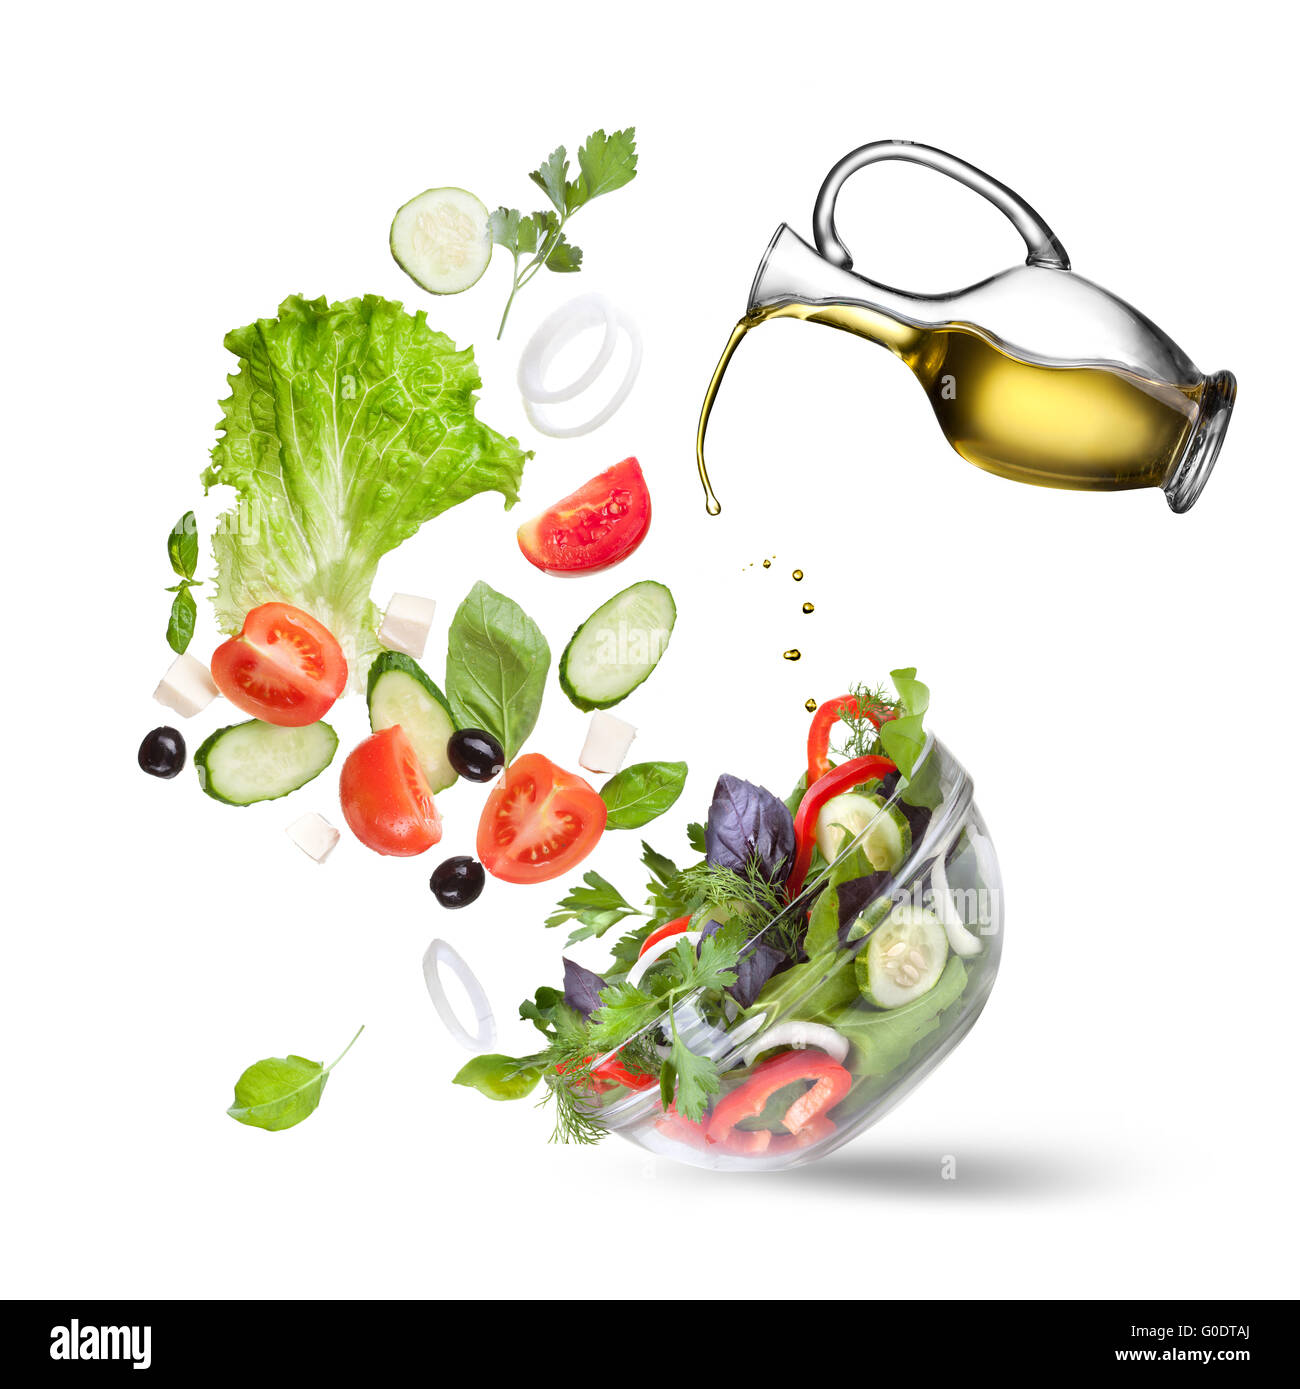 Falling vegetables for salad and oil isolated Stock Photo